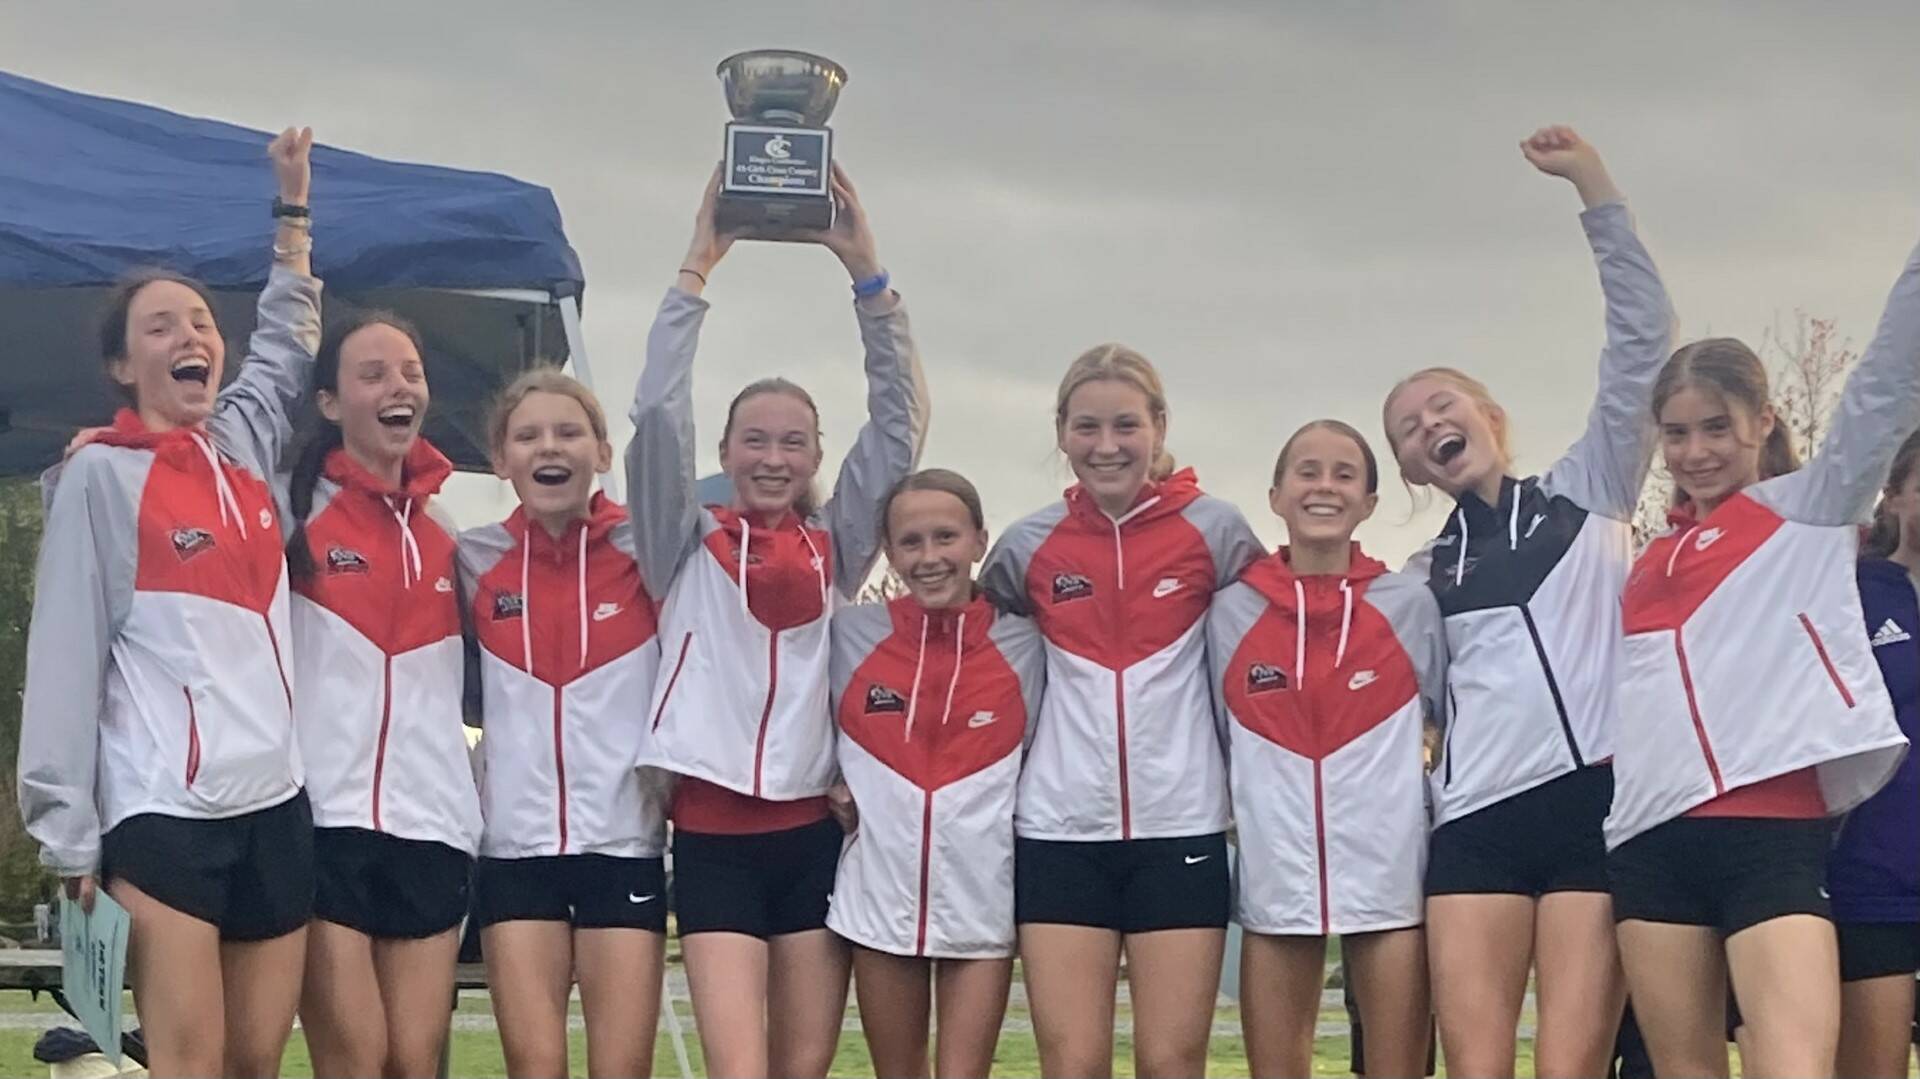 Courtesy photo
The Mount Si Girls Cross Country team hoists the KingCo Trophy.